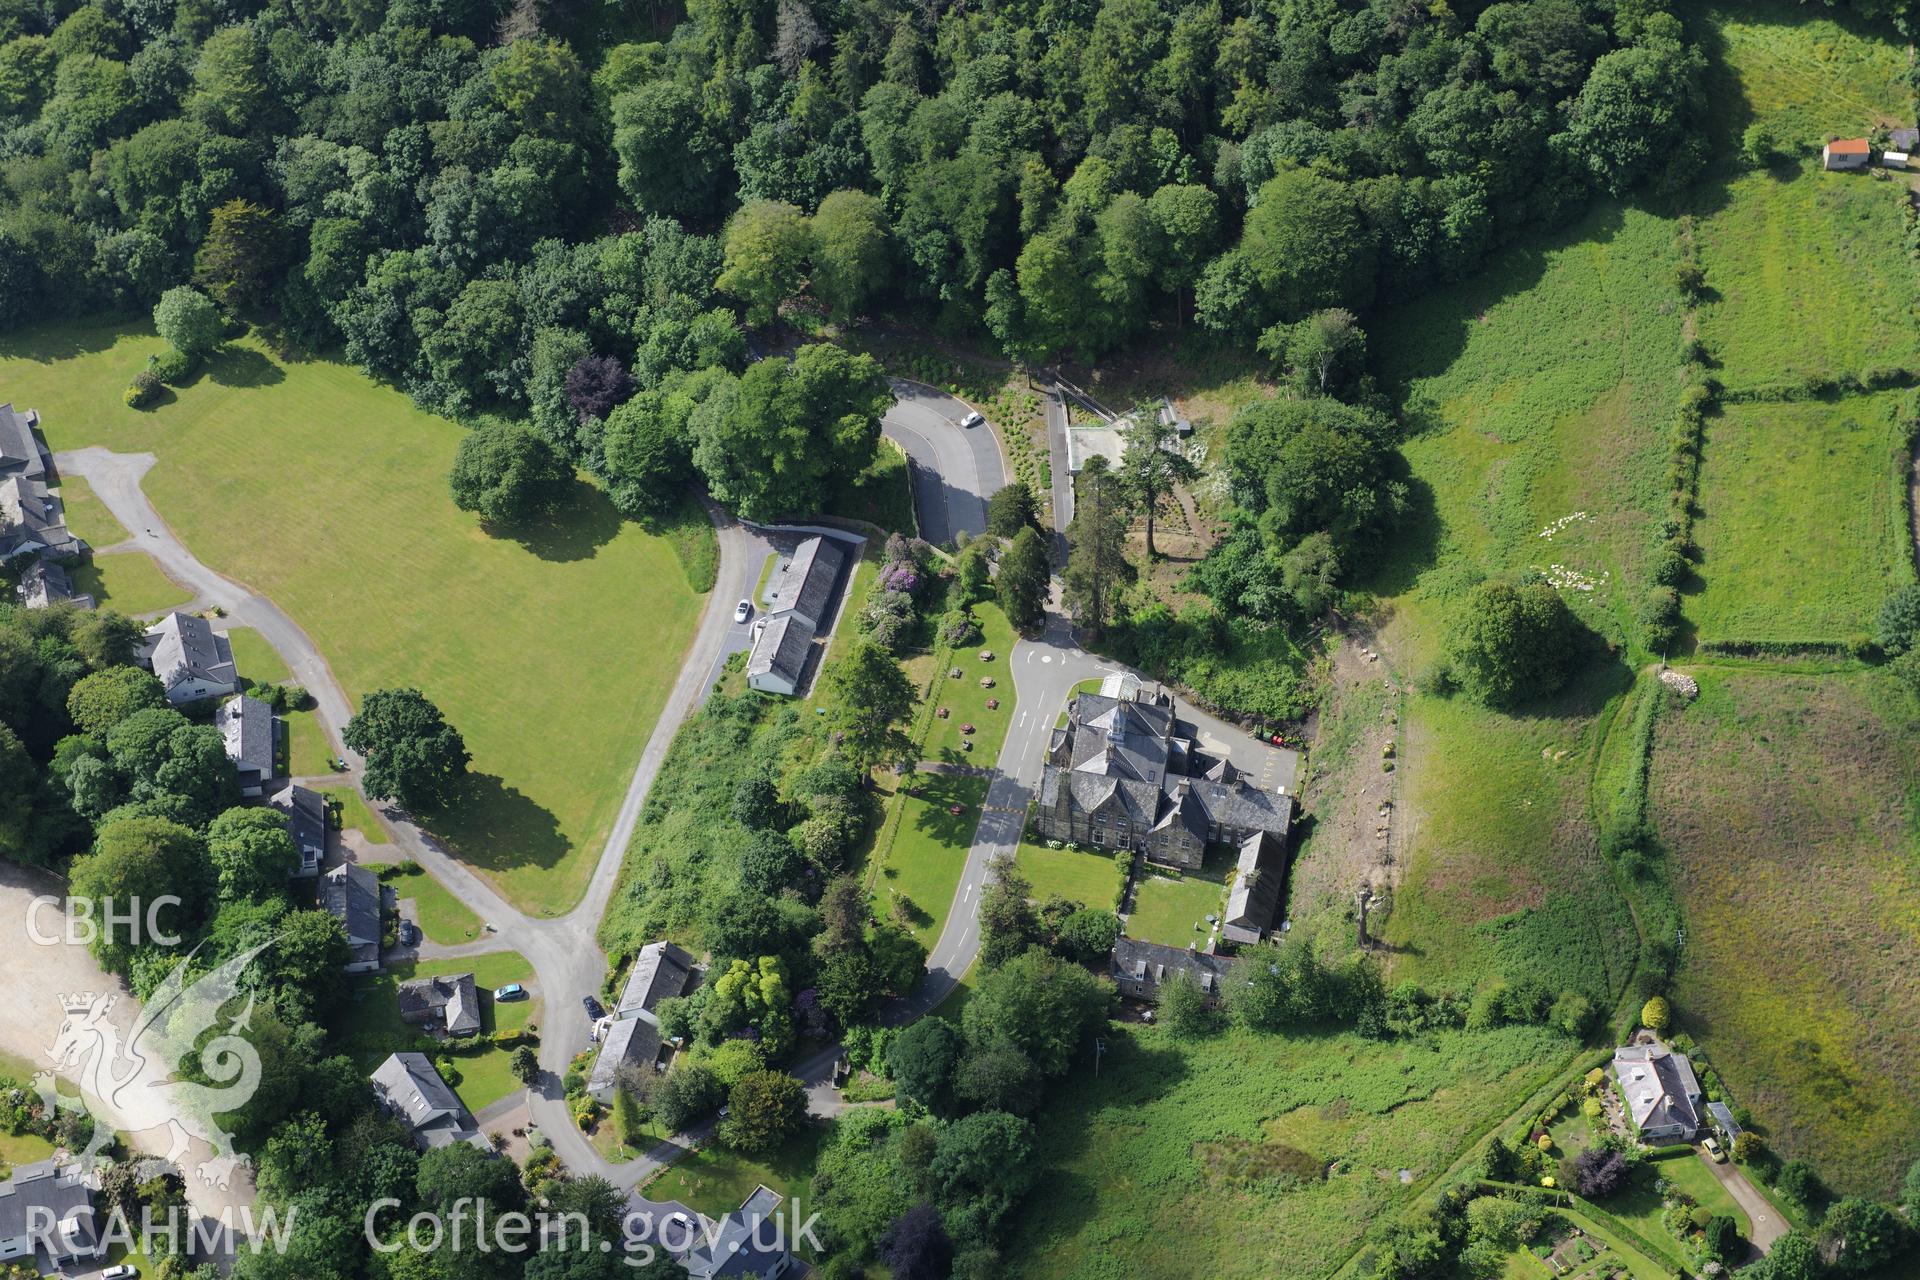 Plas Glyn-y-Weddw including the gardens, outbuildings and stables, Llanbedrog. Oblique aerial photograph taken during the Royal Commission's programme of archaeological aerial reconnaissance by Toby Driver on 23rd June 2015.